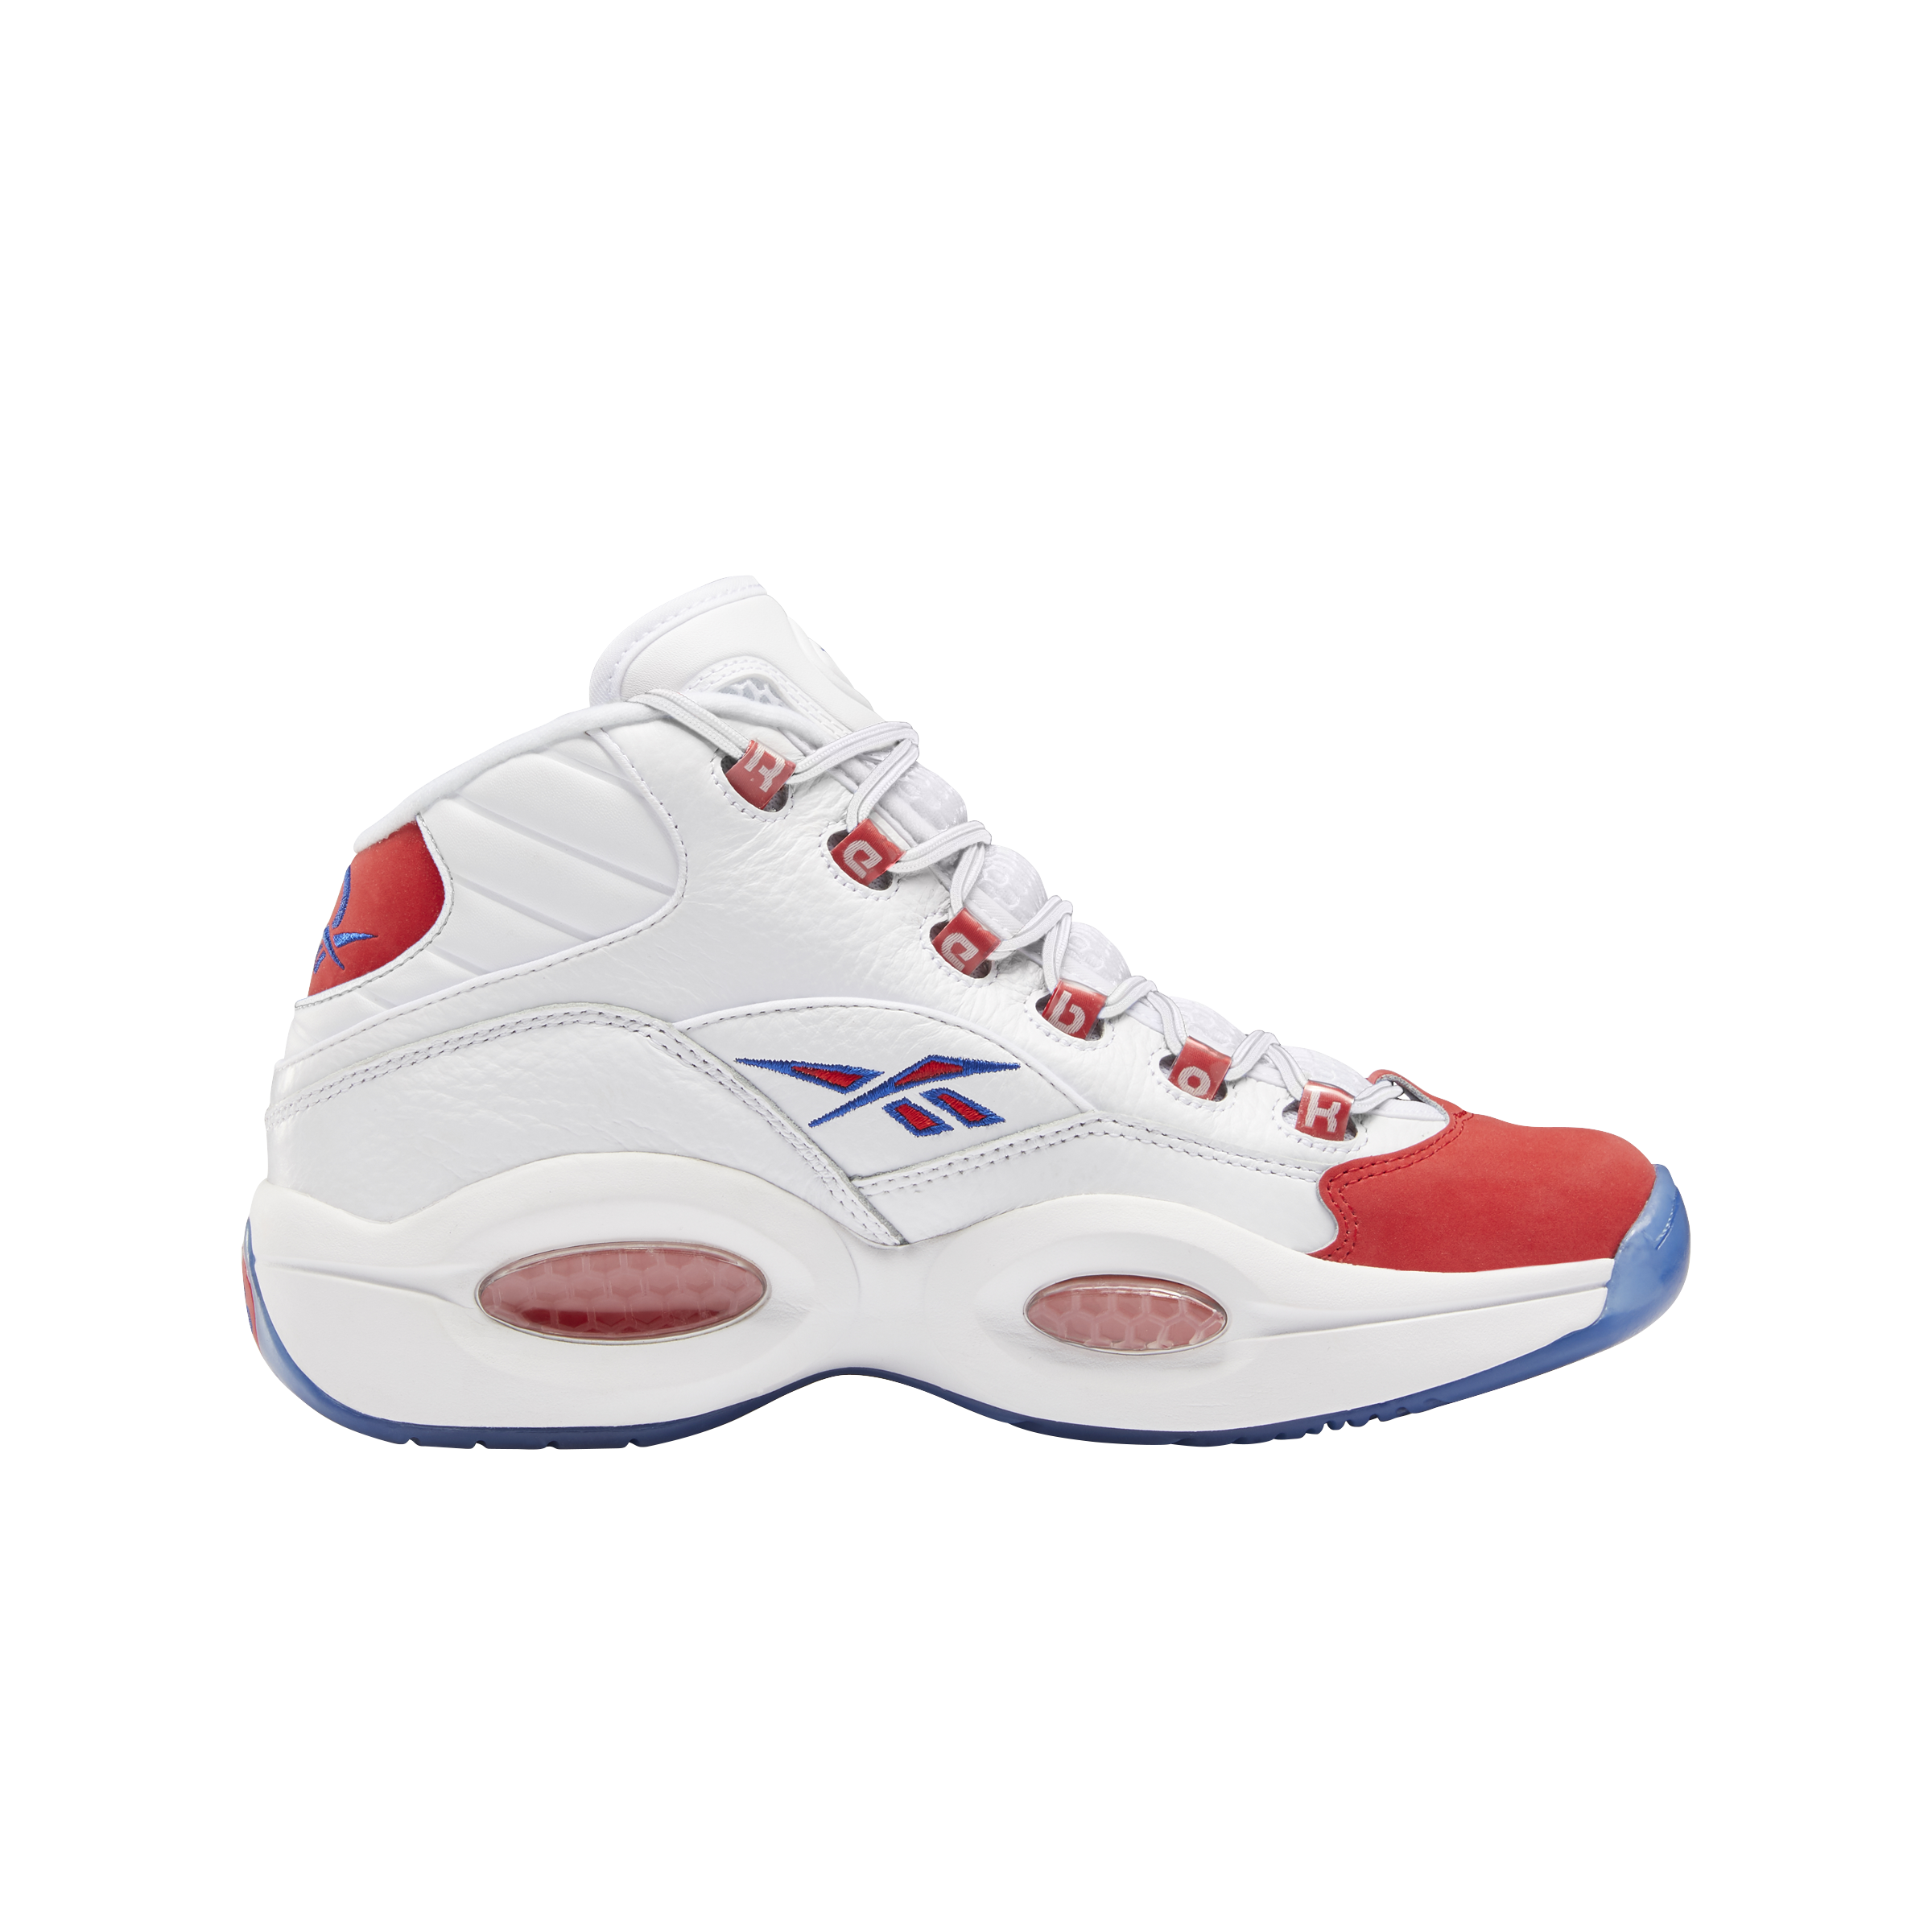 Reebok Launches the Crossover U  Celebrating Allen Iverson Legacy